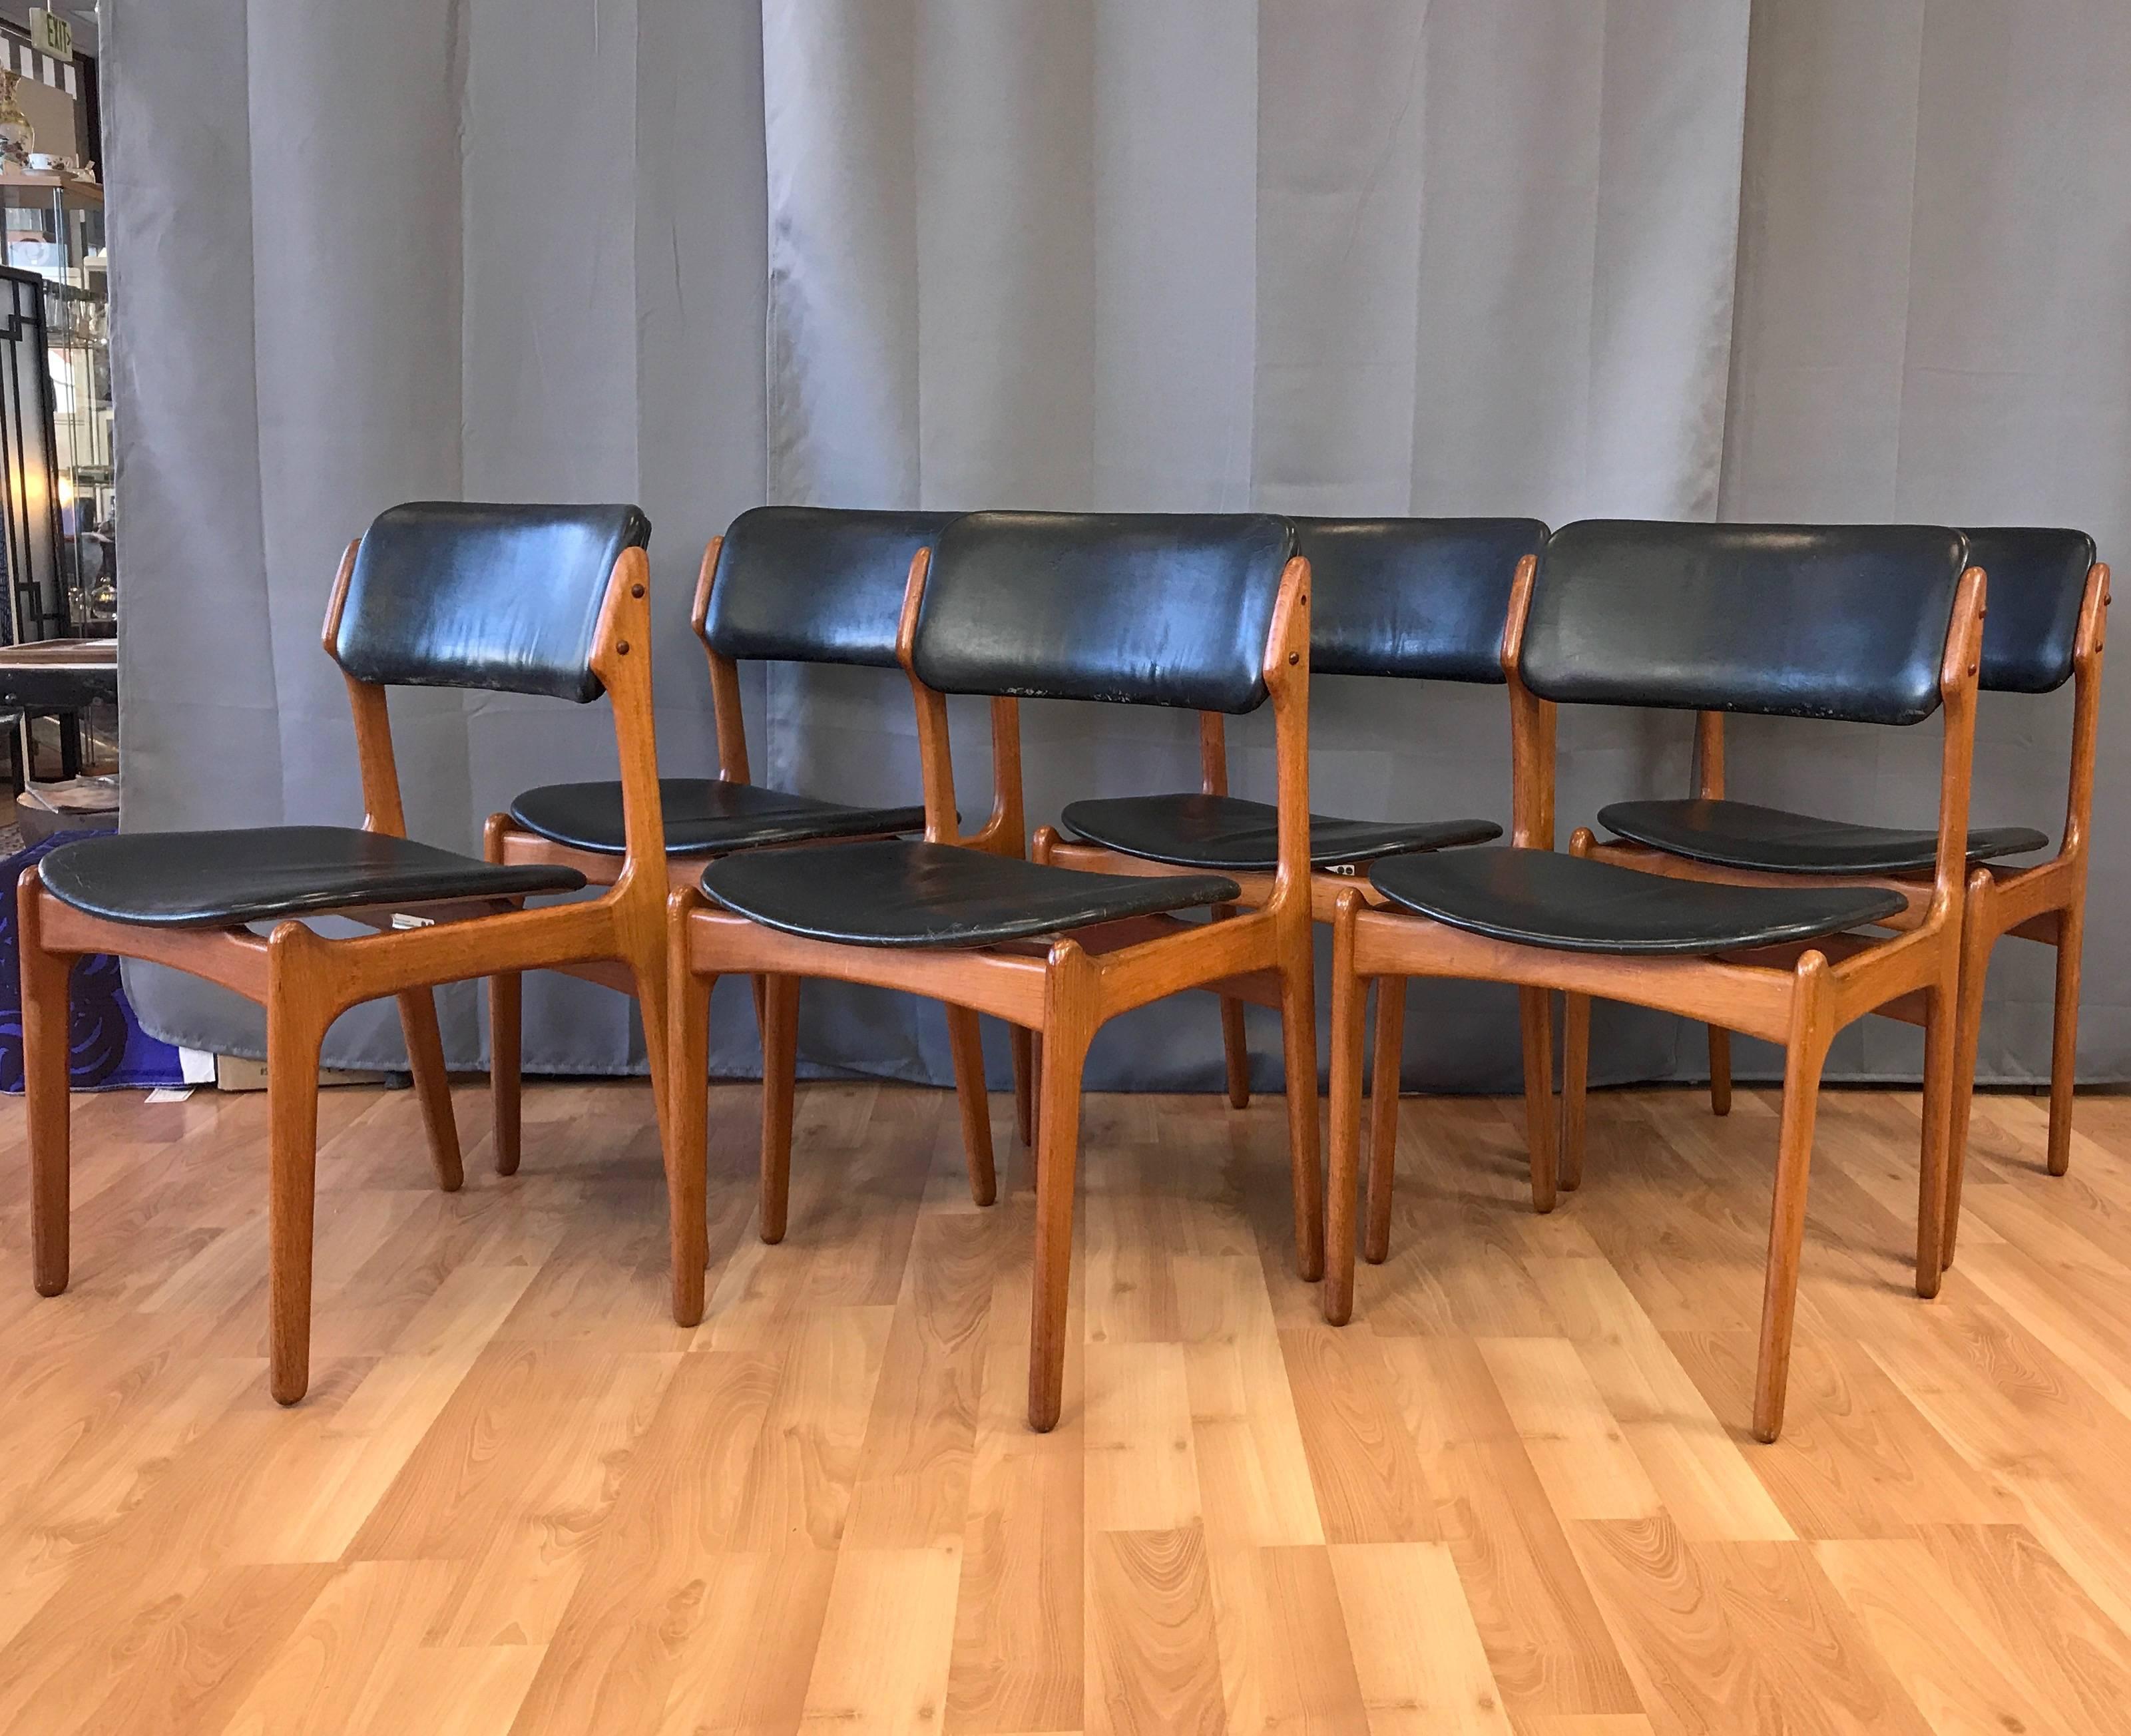 A six-piece set of classic Danish OD-49 teak and leather dining chairs by Erik Buch for O.D. Møbler (Oddense Maskinsnedkeri).

Solid teak frame distinguished by assertive, smoothly sculpted lines. Distinctive thin floating seat and canted back are